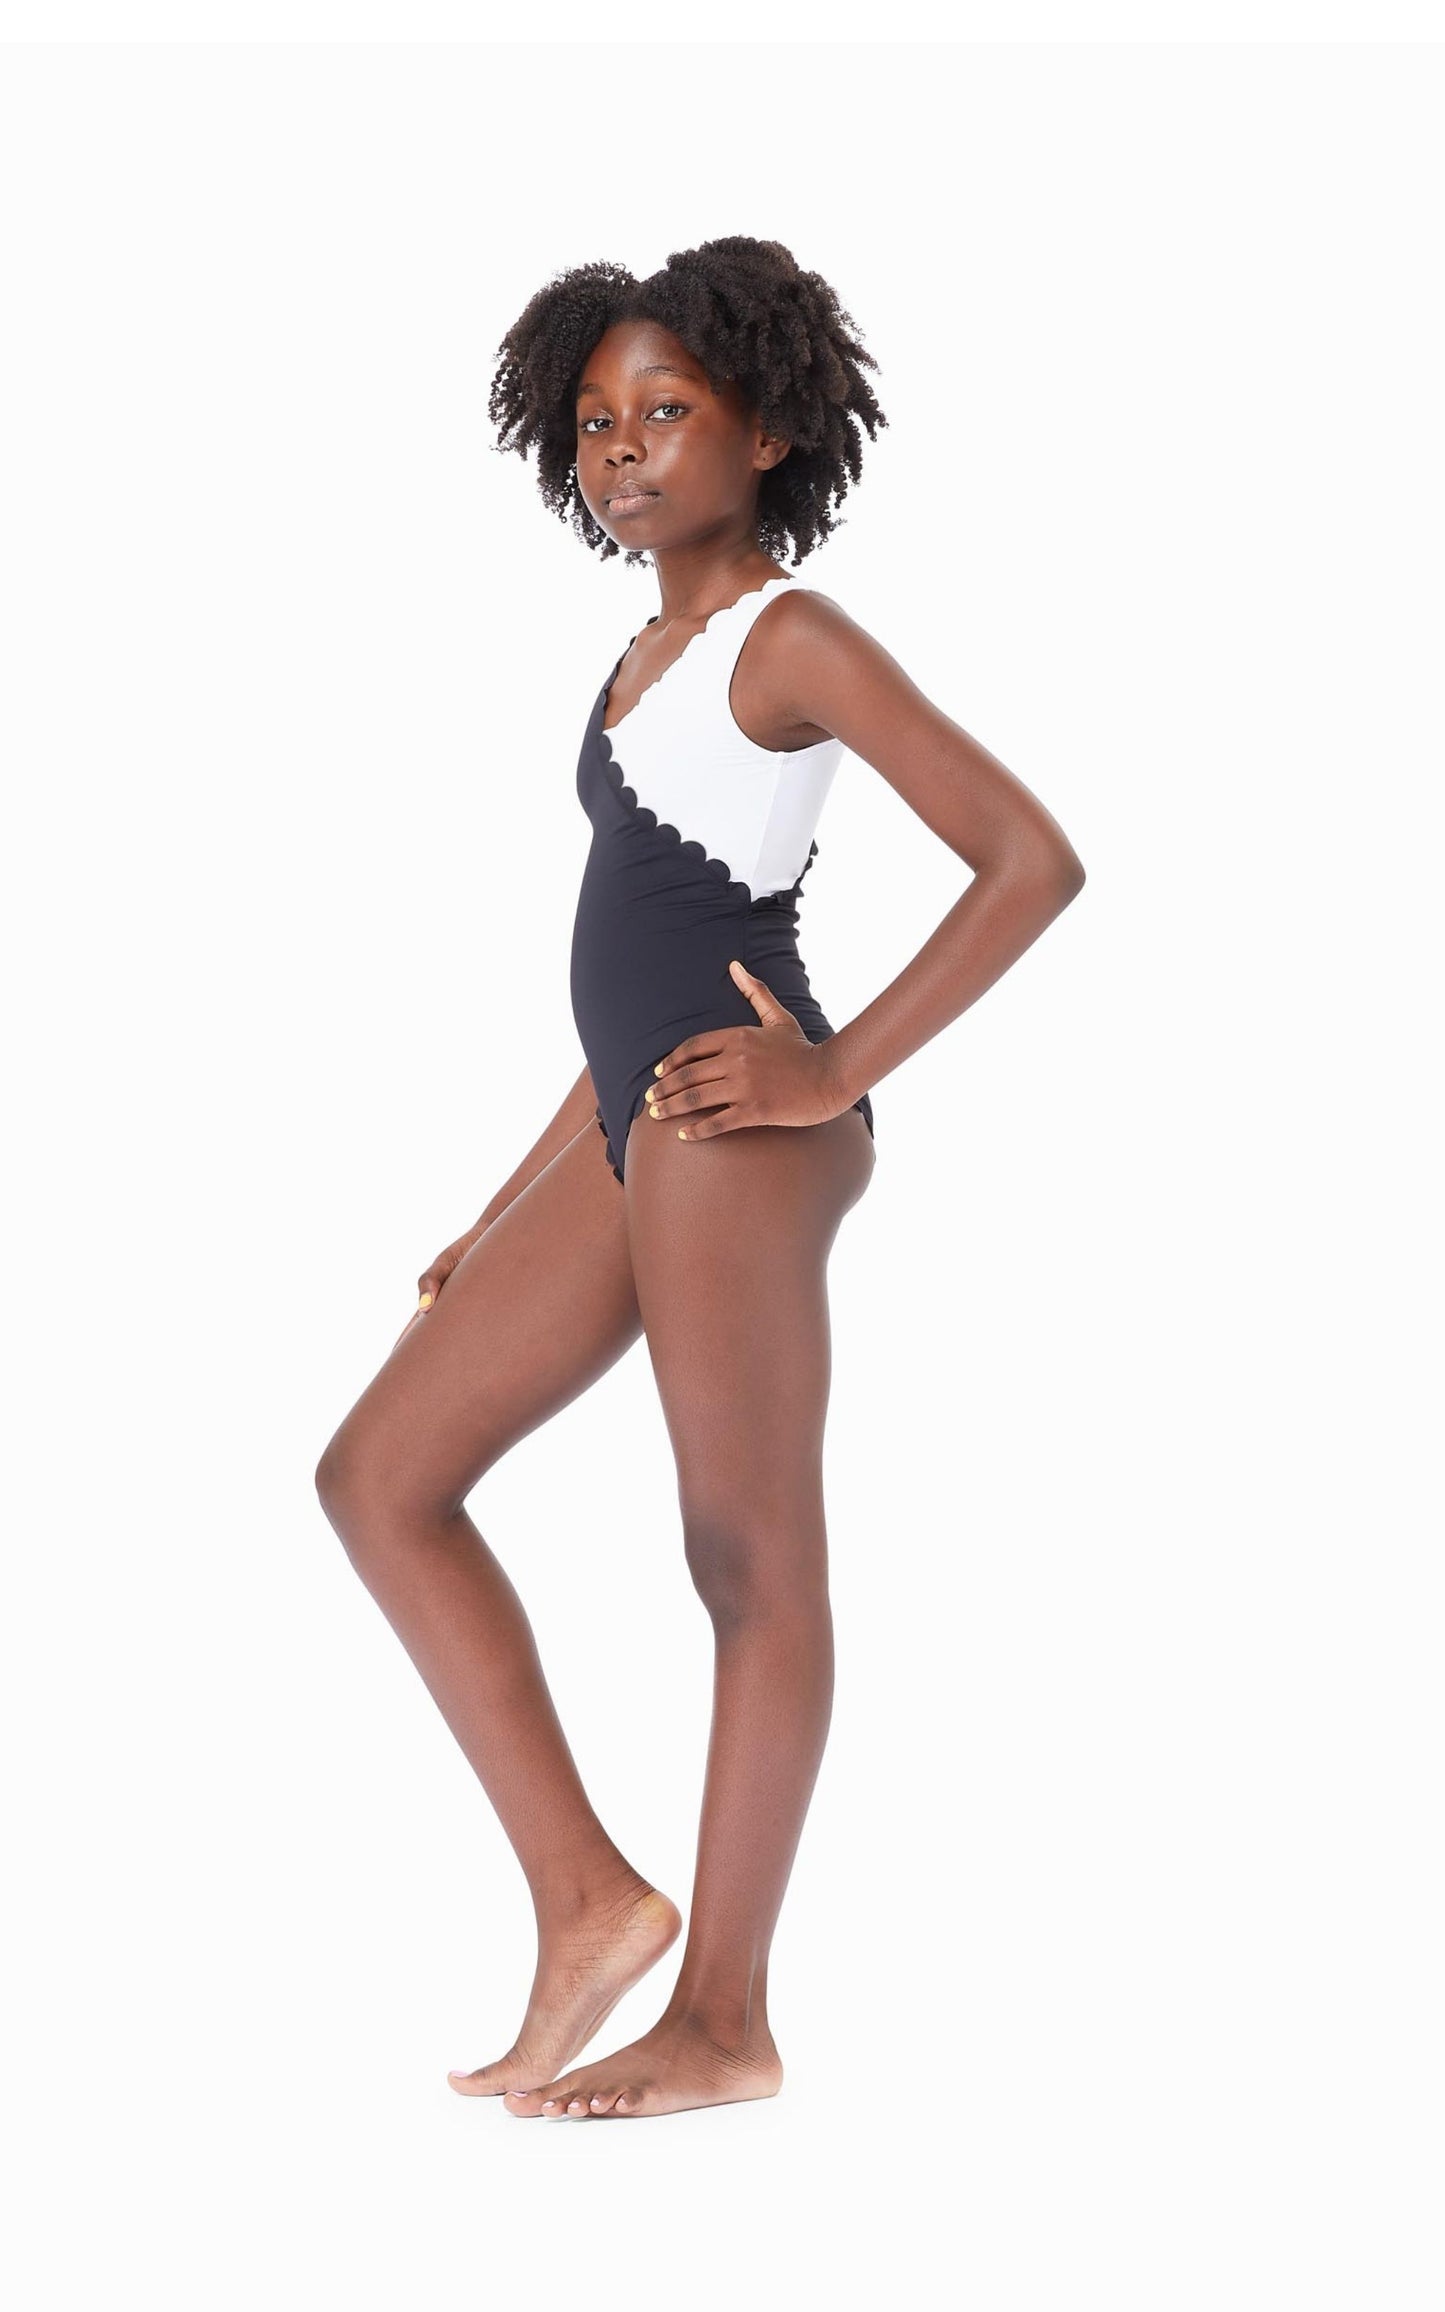 Young girl wearing black-and-white color block one-piece swimsuit with scalloped trim